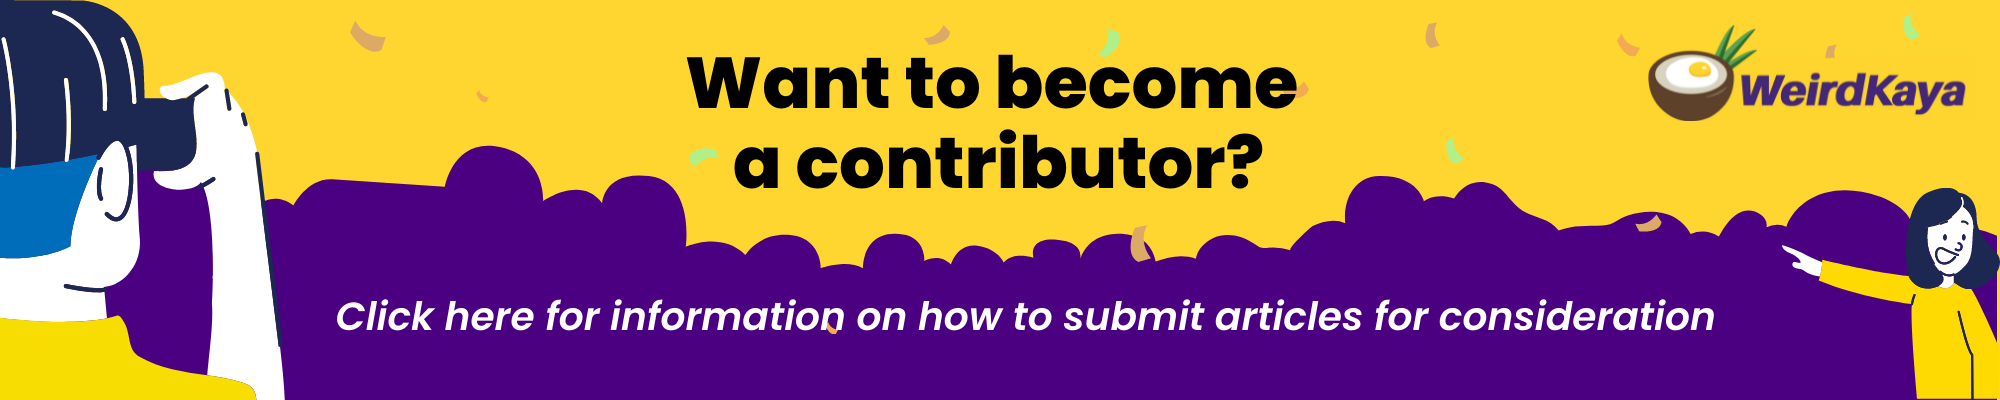 Want to become a contributor on weirdkaya?